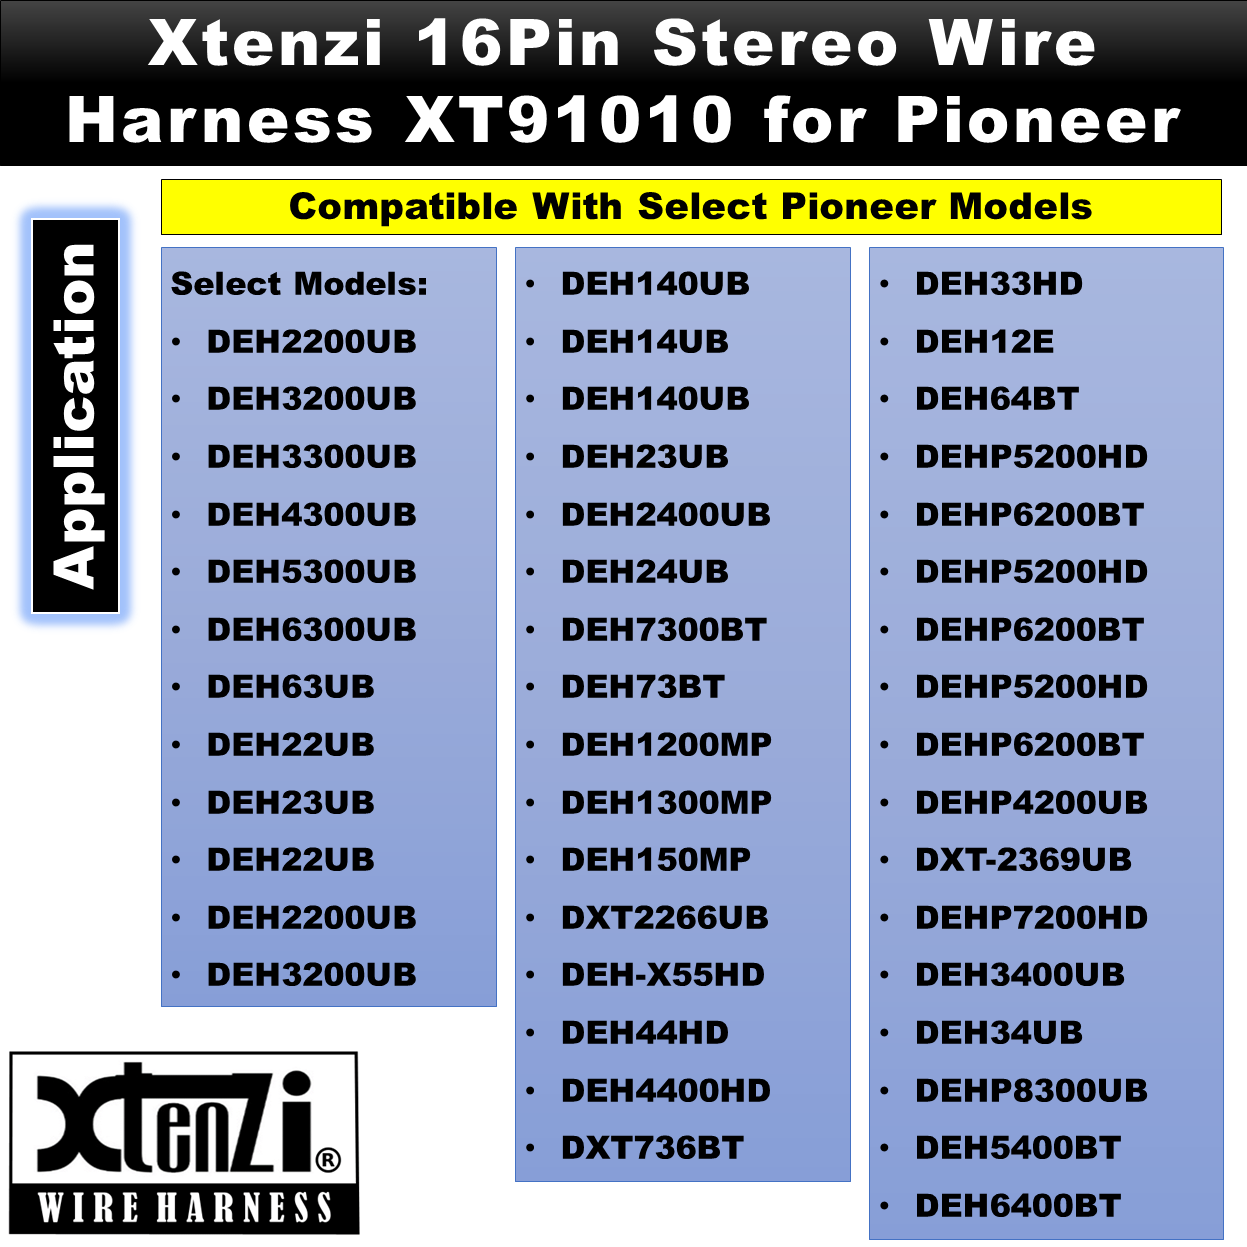 Xtenzi 16Pin Car Radio Power Wire Harness Connector for Pioneer DEH-1300M DEH-2200UB & More - XT91010